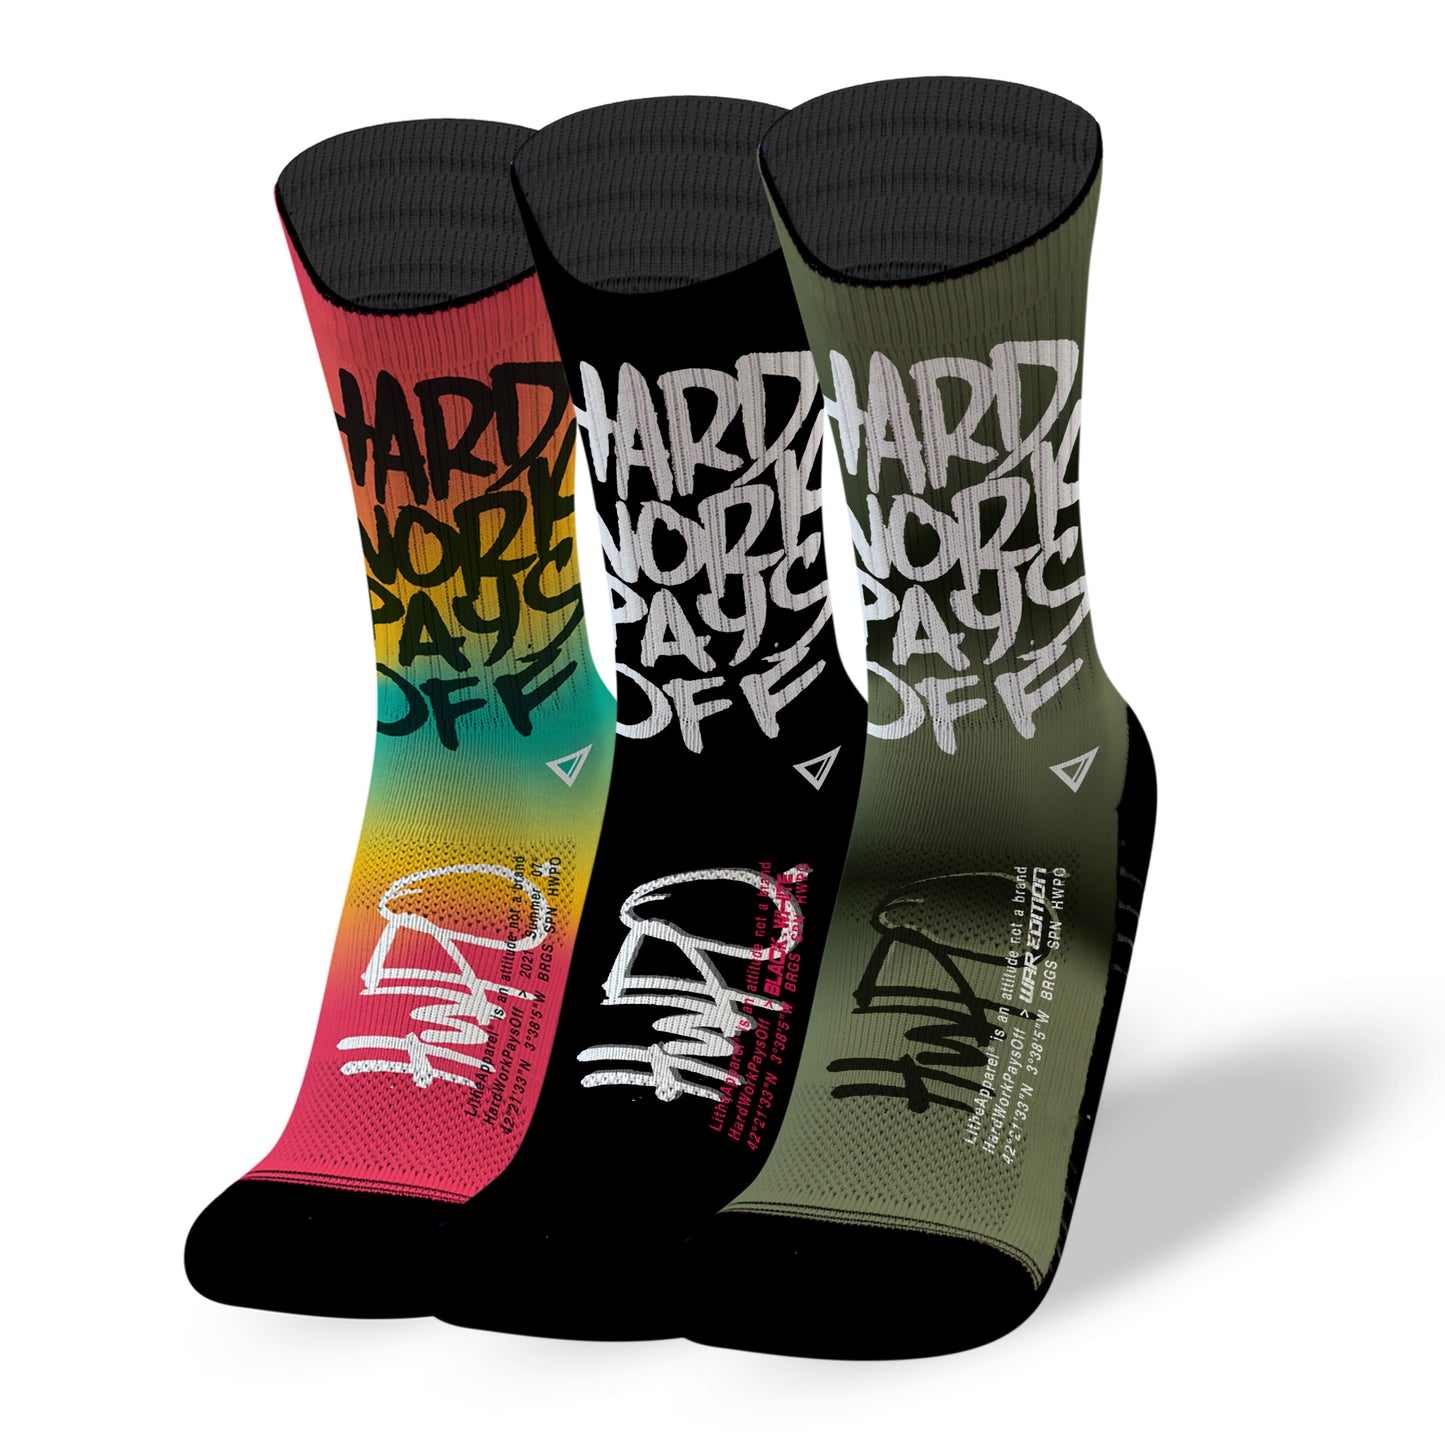 HARD WORK PAYS OFF [3 PACK] RX SOCKS